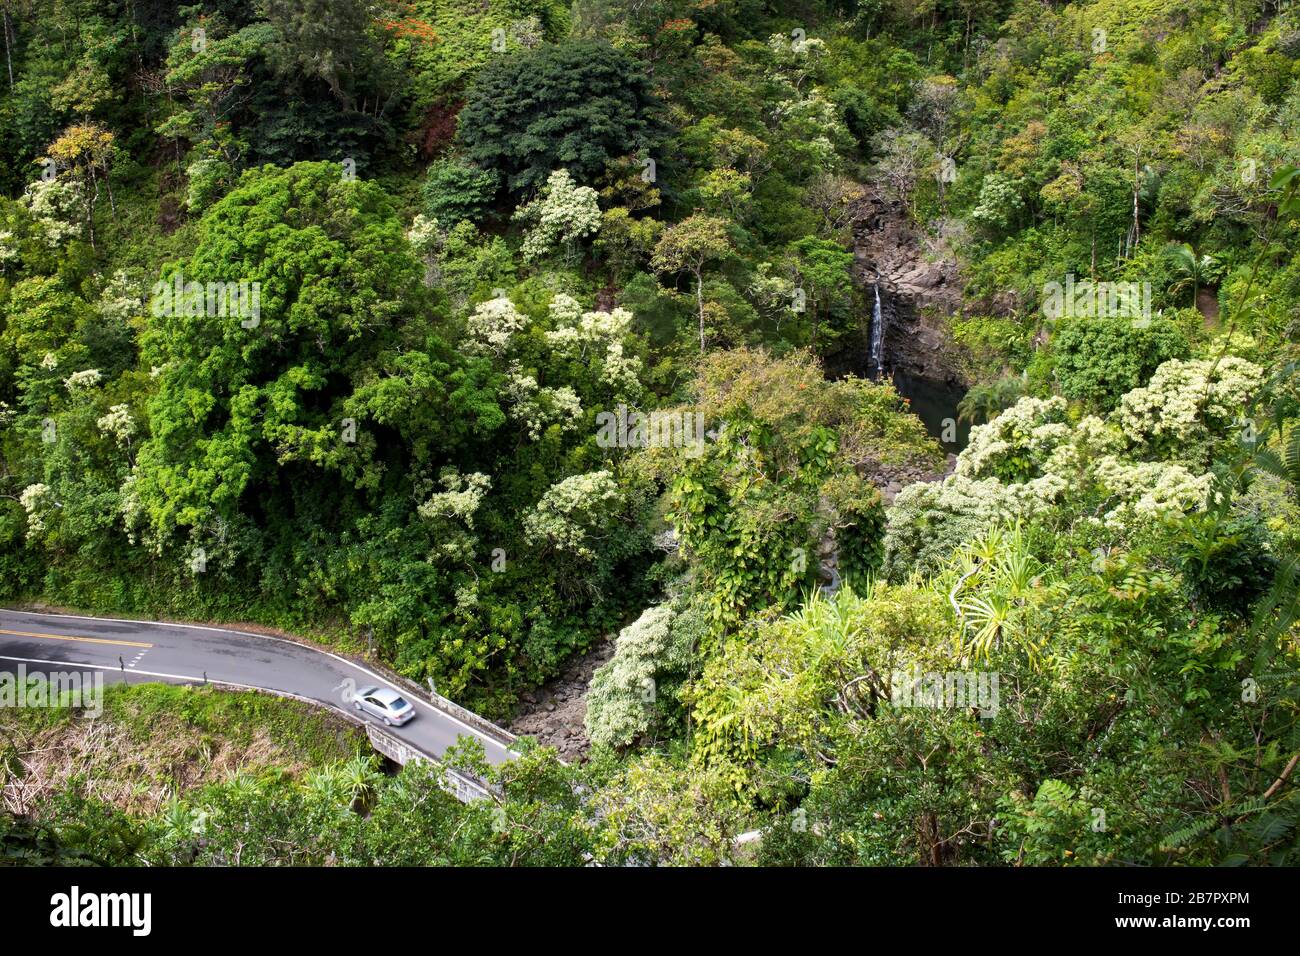 Car drives on one lane bridge through lush jungle foliage in Hawaii with waterfall in background. Stock Photo